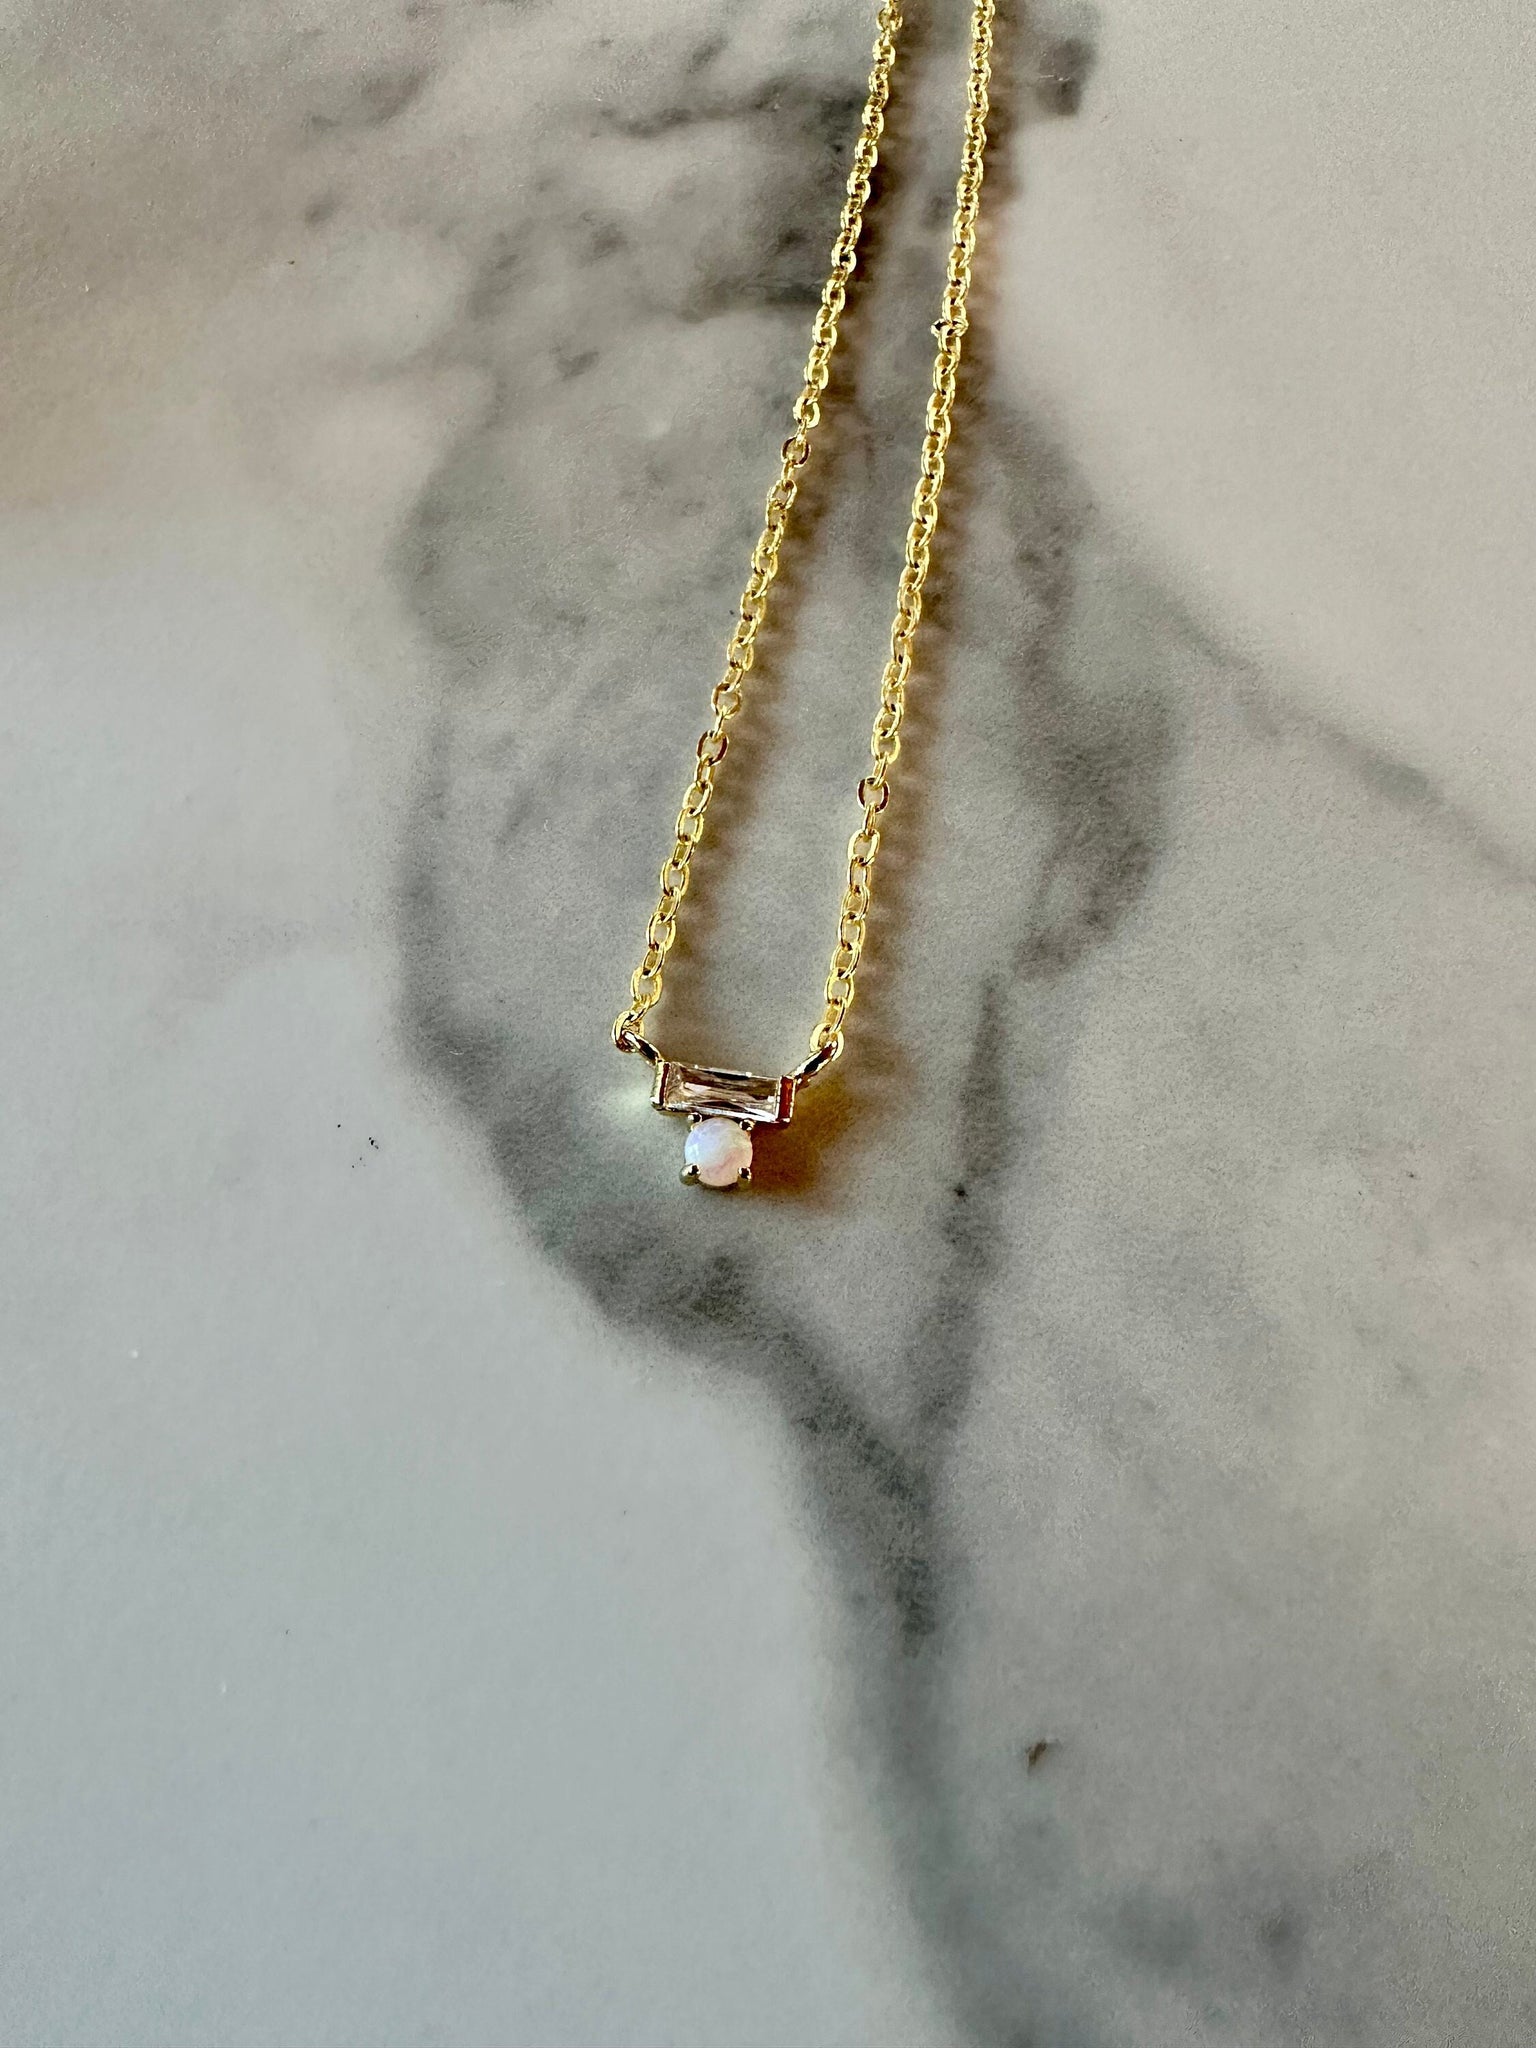 delicate gold opal necklace, tiny gold necklace, opal necklace, delicate necklace, gold jewelry, gift, gift for her, bridal, bridesmaid